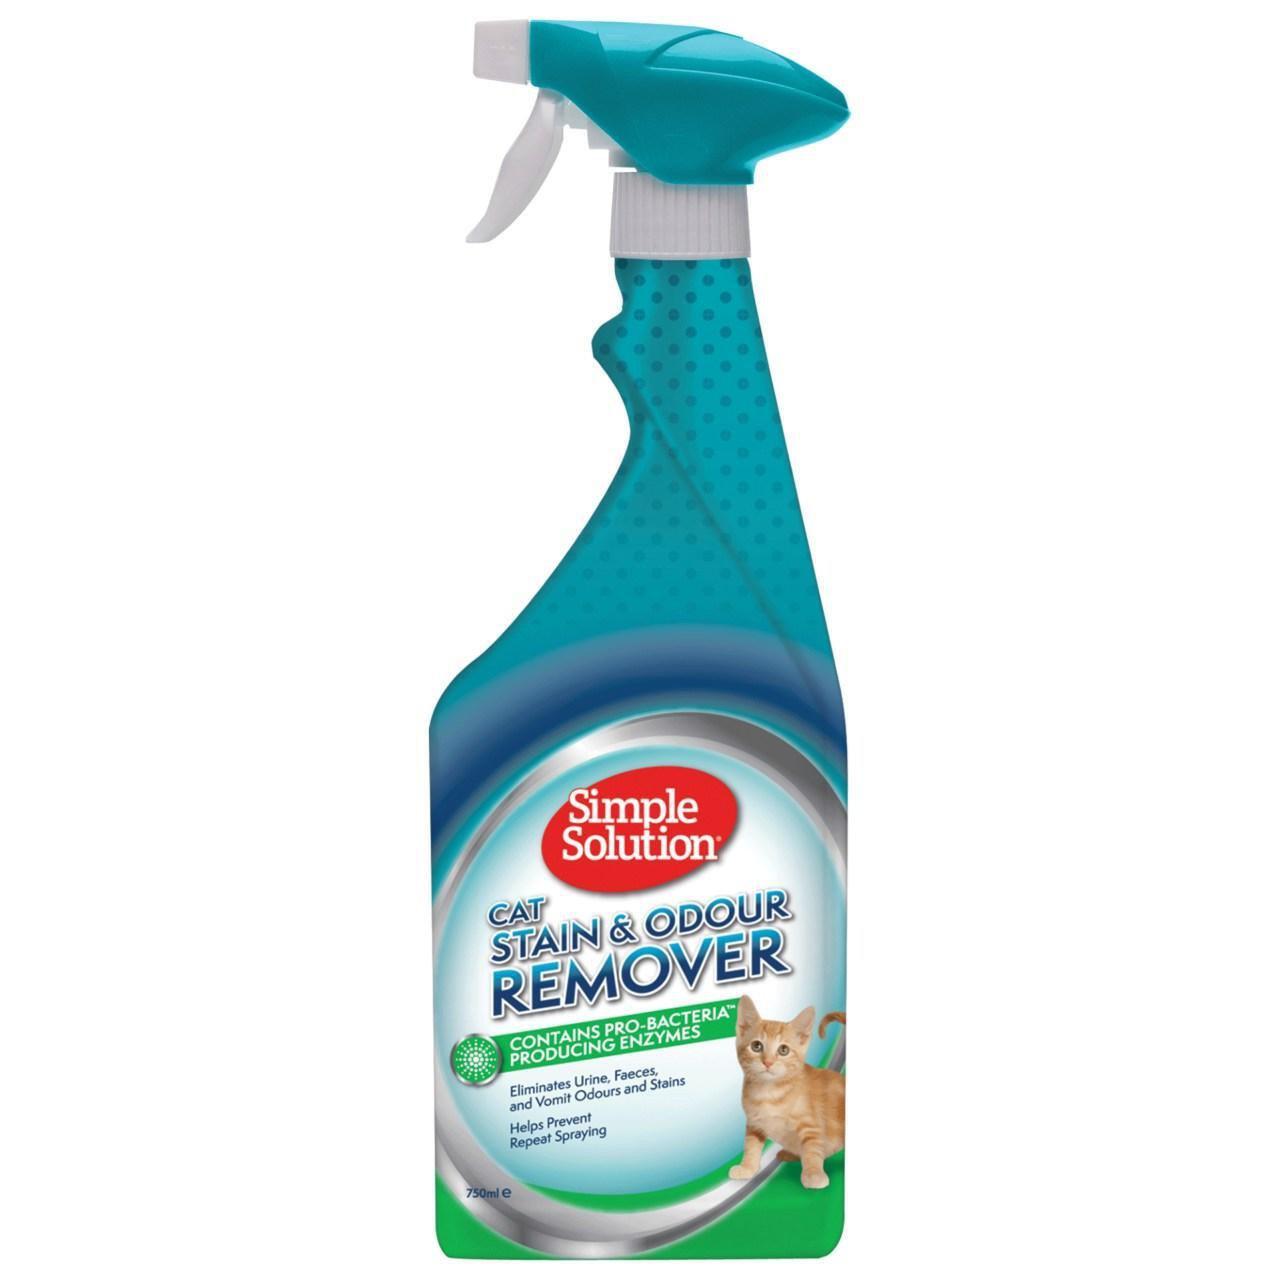 Simple Solution stain & Odour Remover-Pettitt and Boo